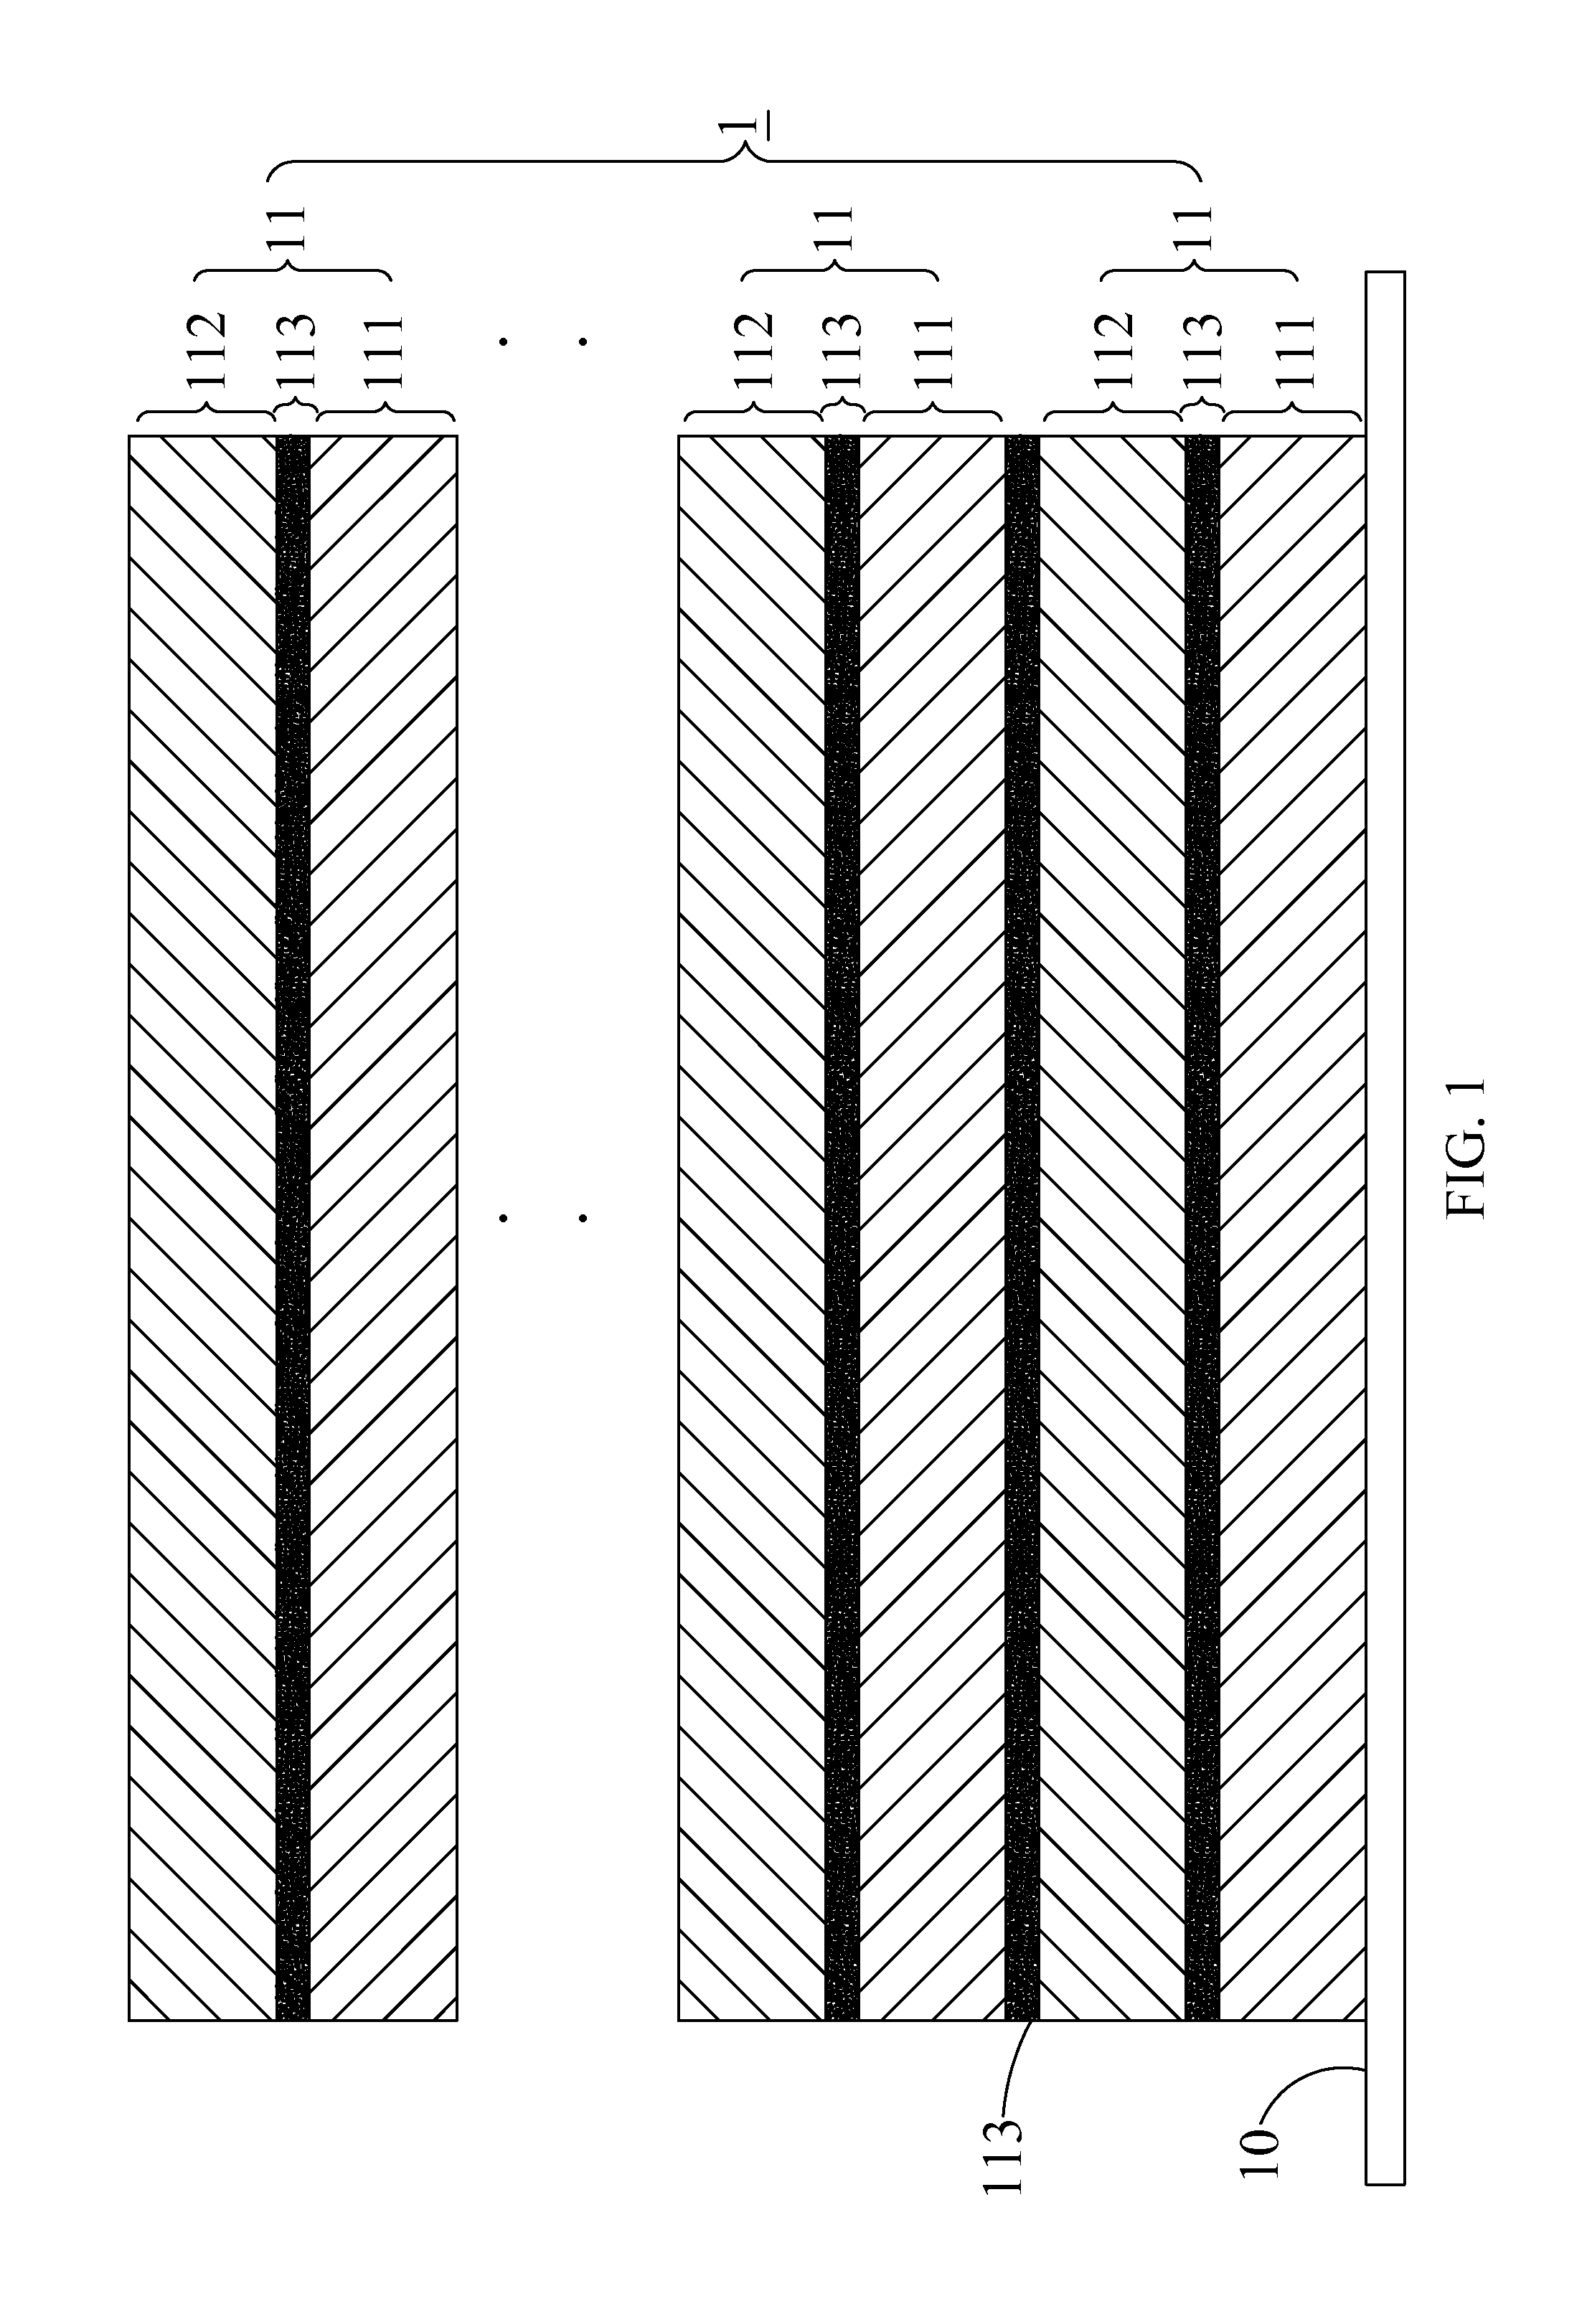 Nano-laminated film with transparent conductive property and water-vapor resistance function and method thereof